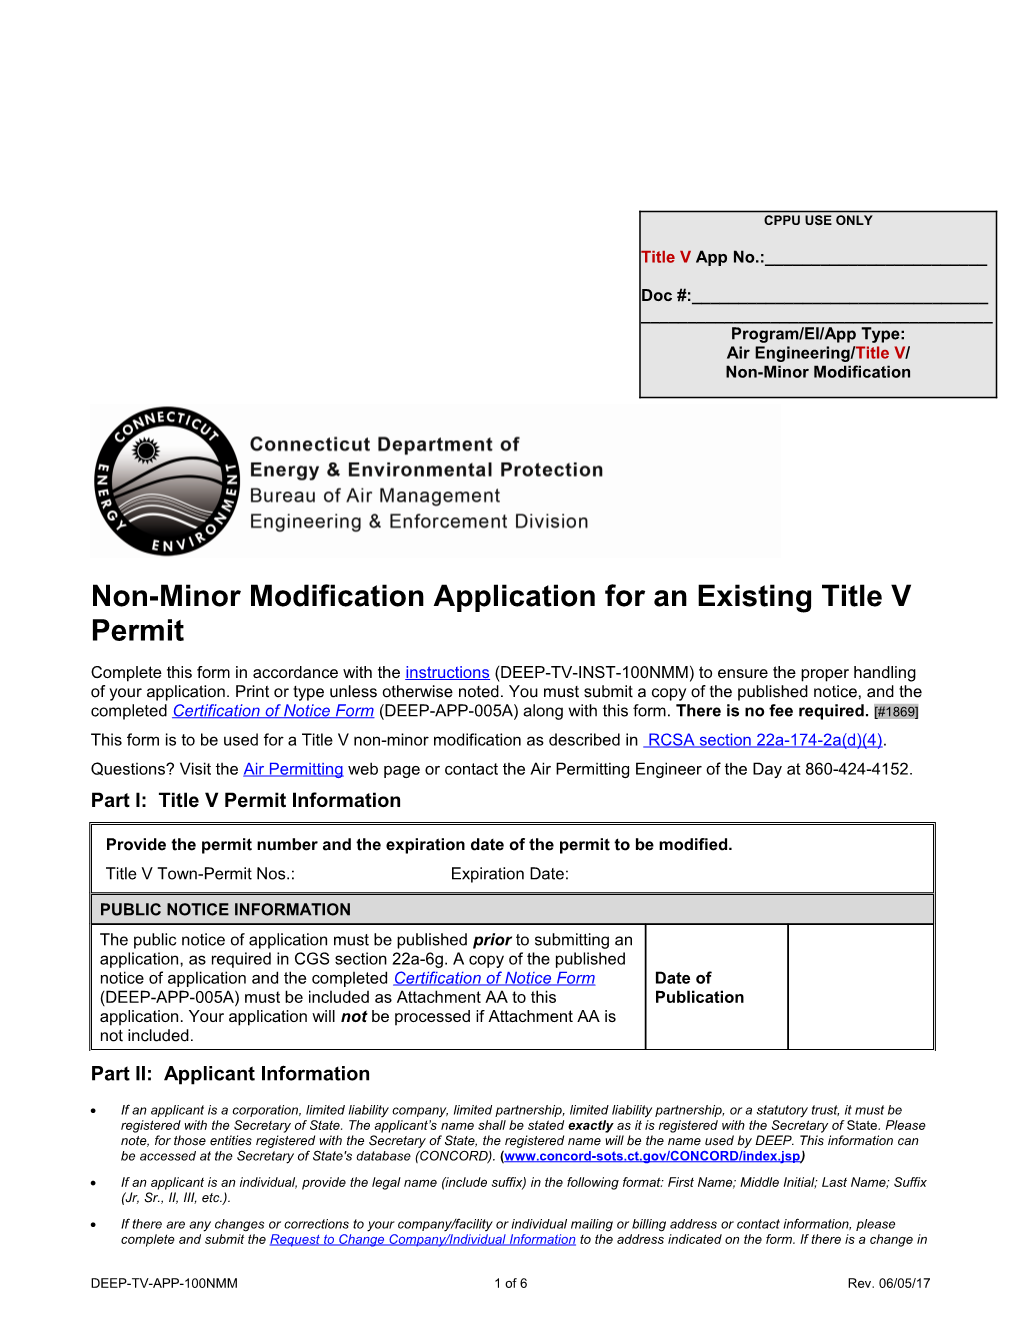 Non-Minor Modification Application for an Existing Title V Permit